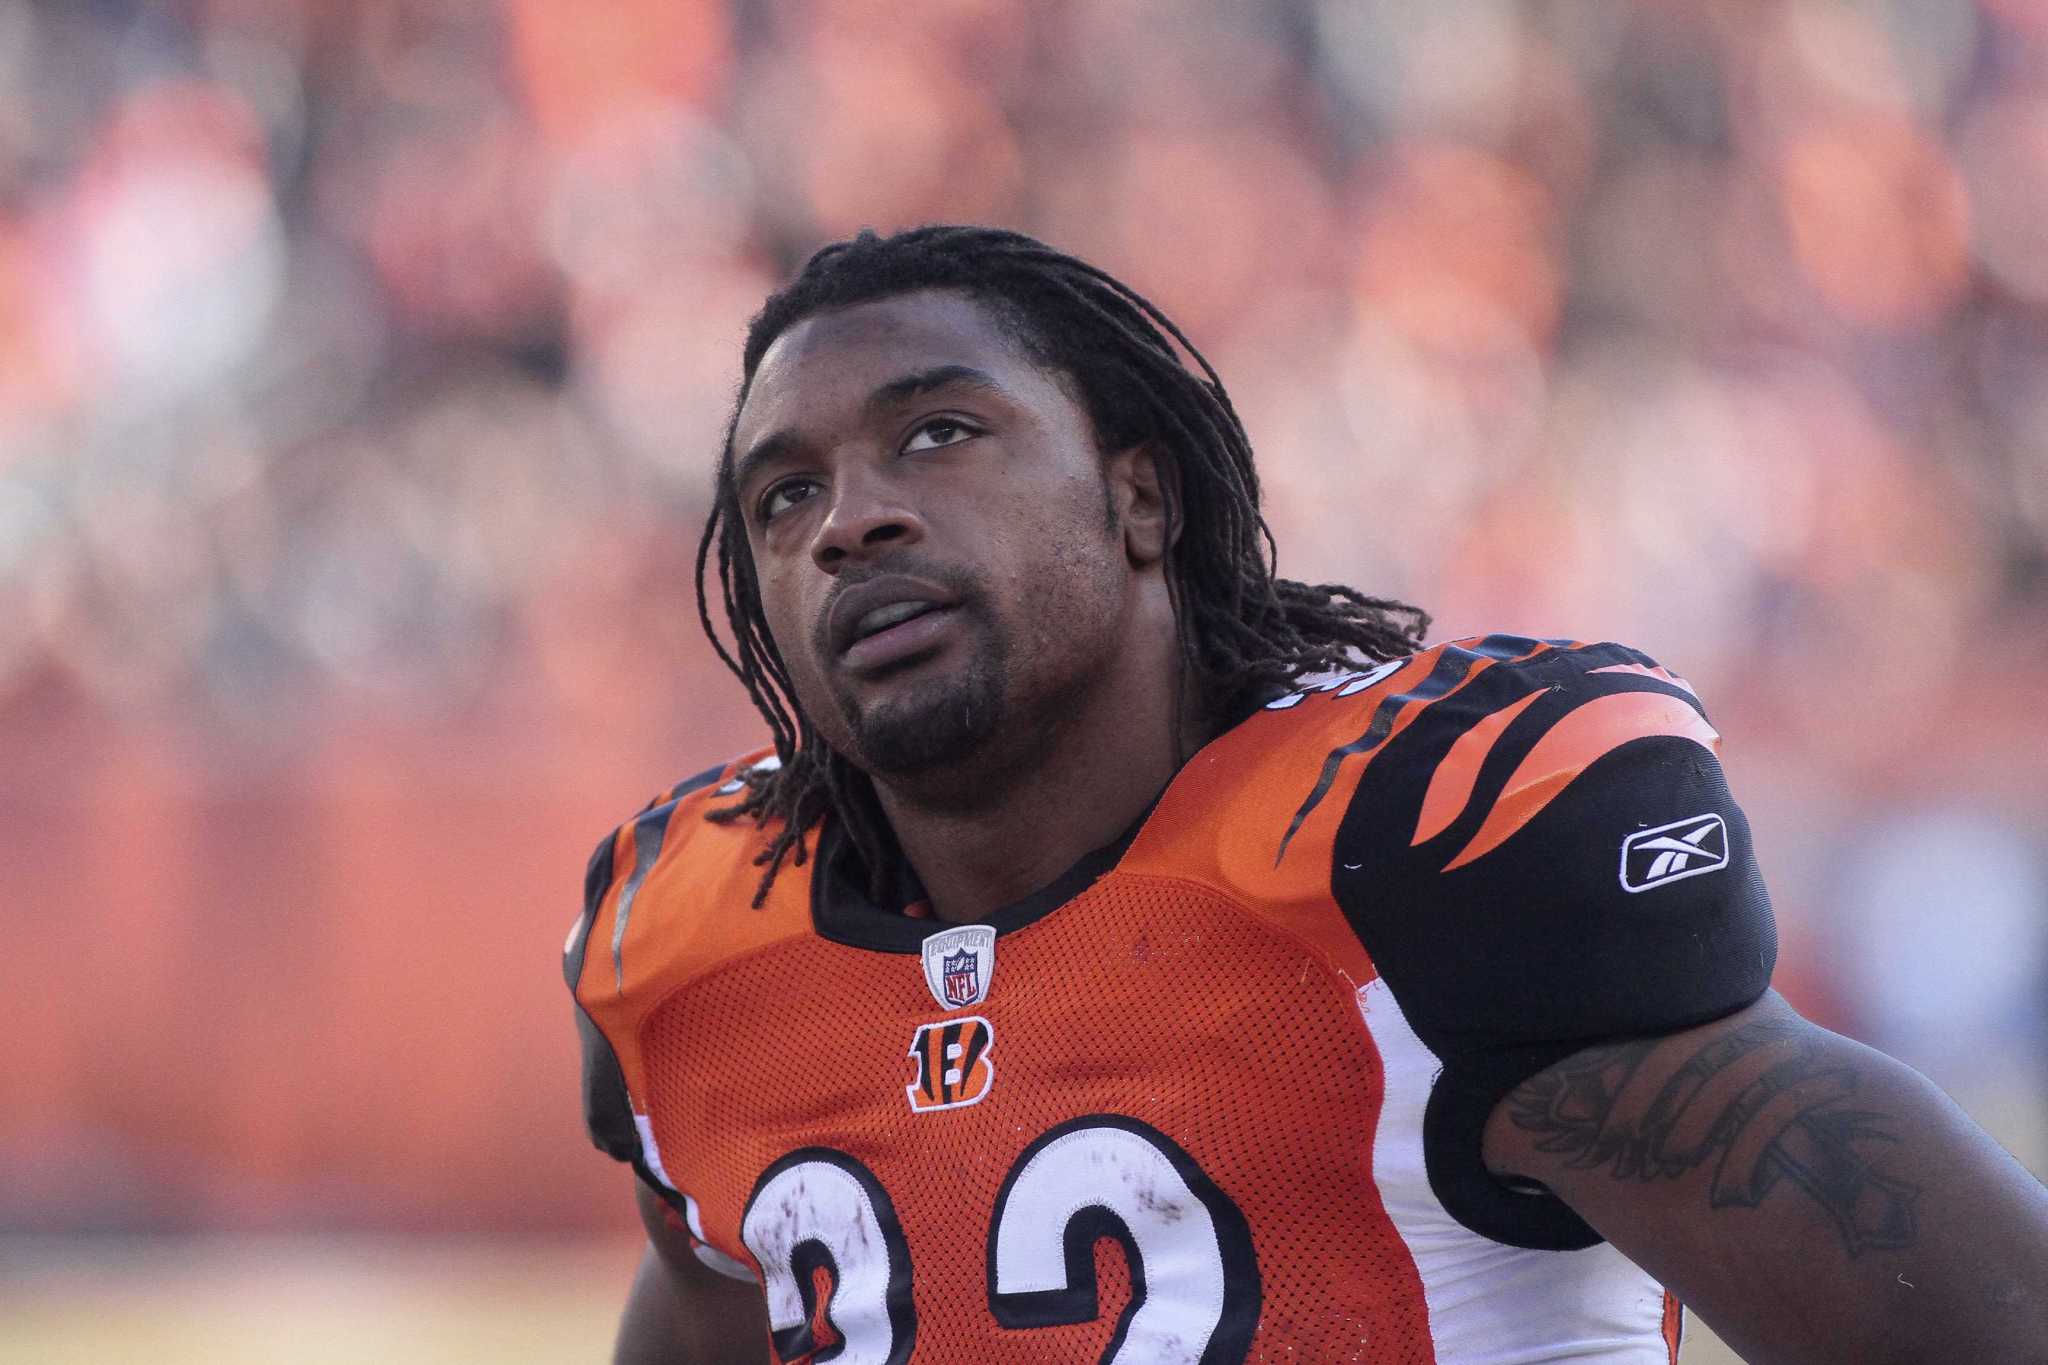 Former NFL player Cedric Benson dies in motorcycle accident at 36